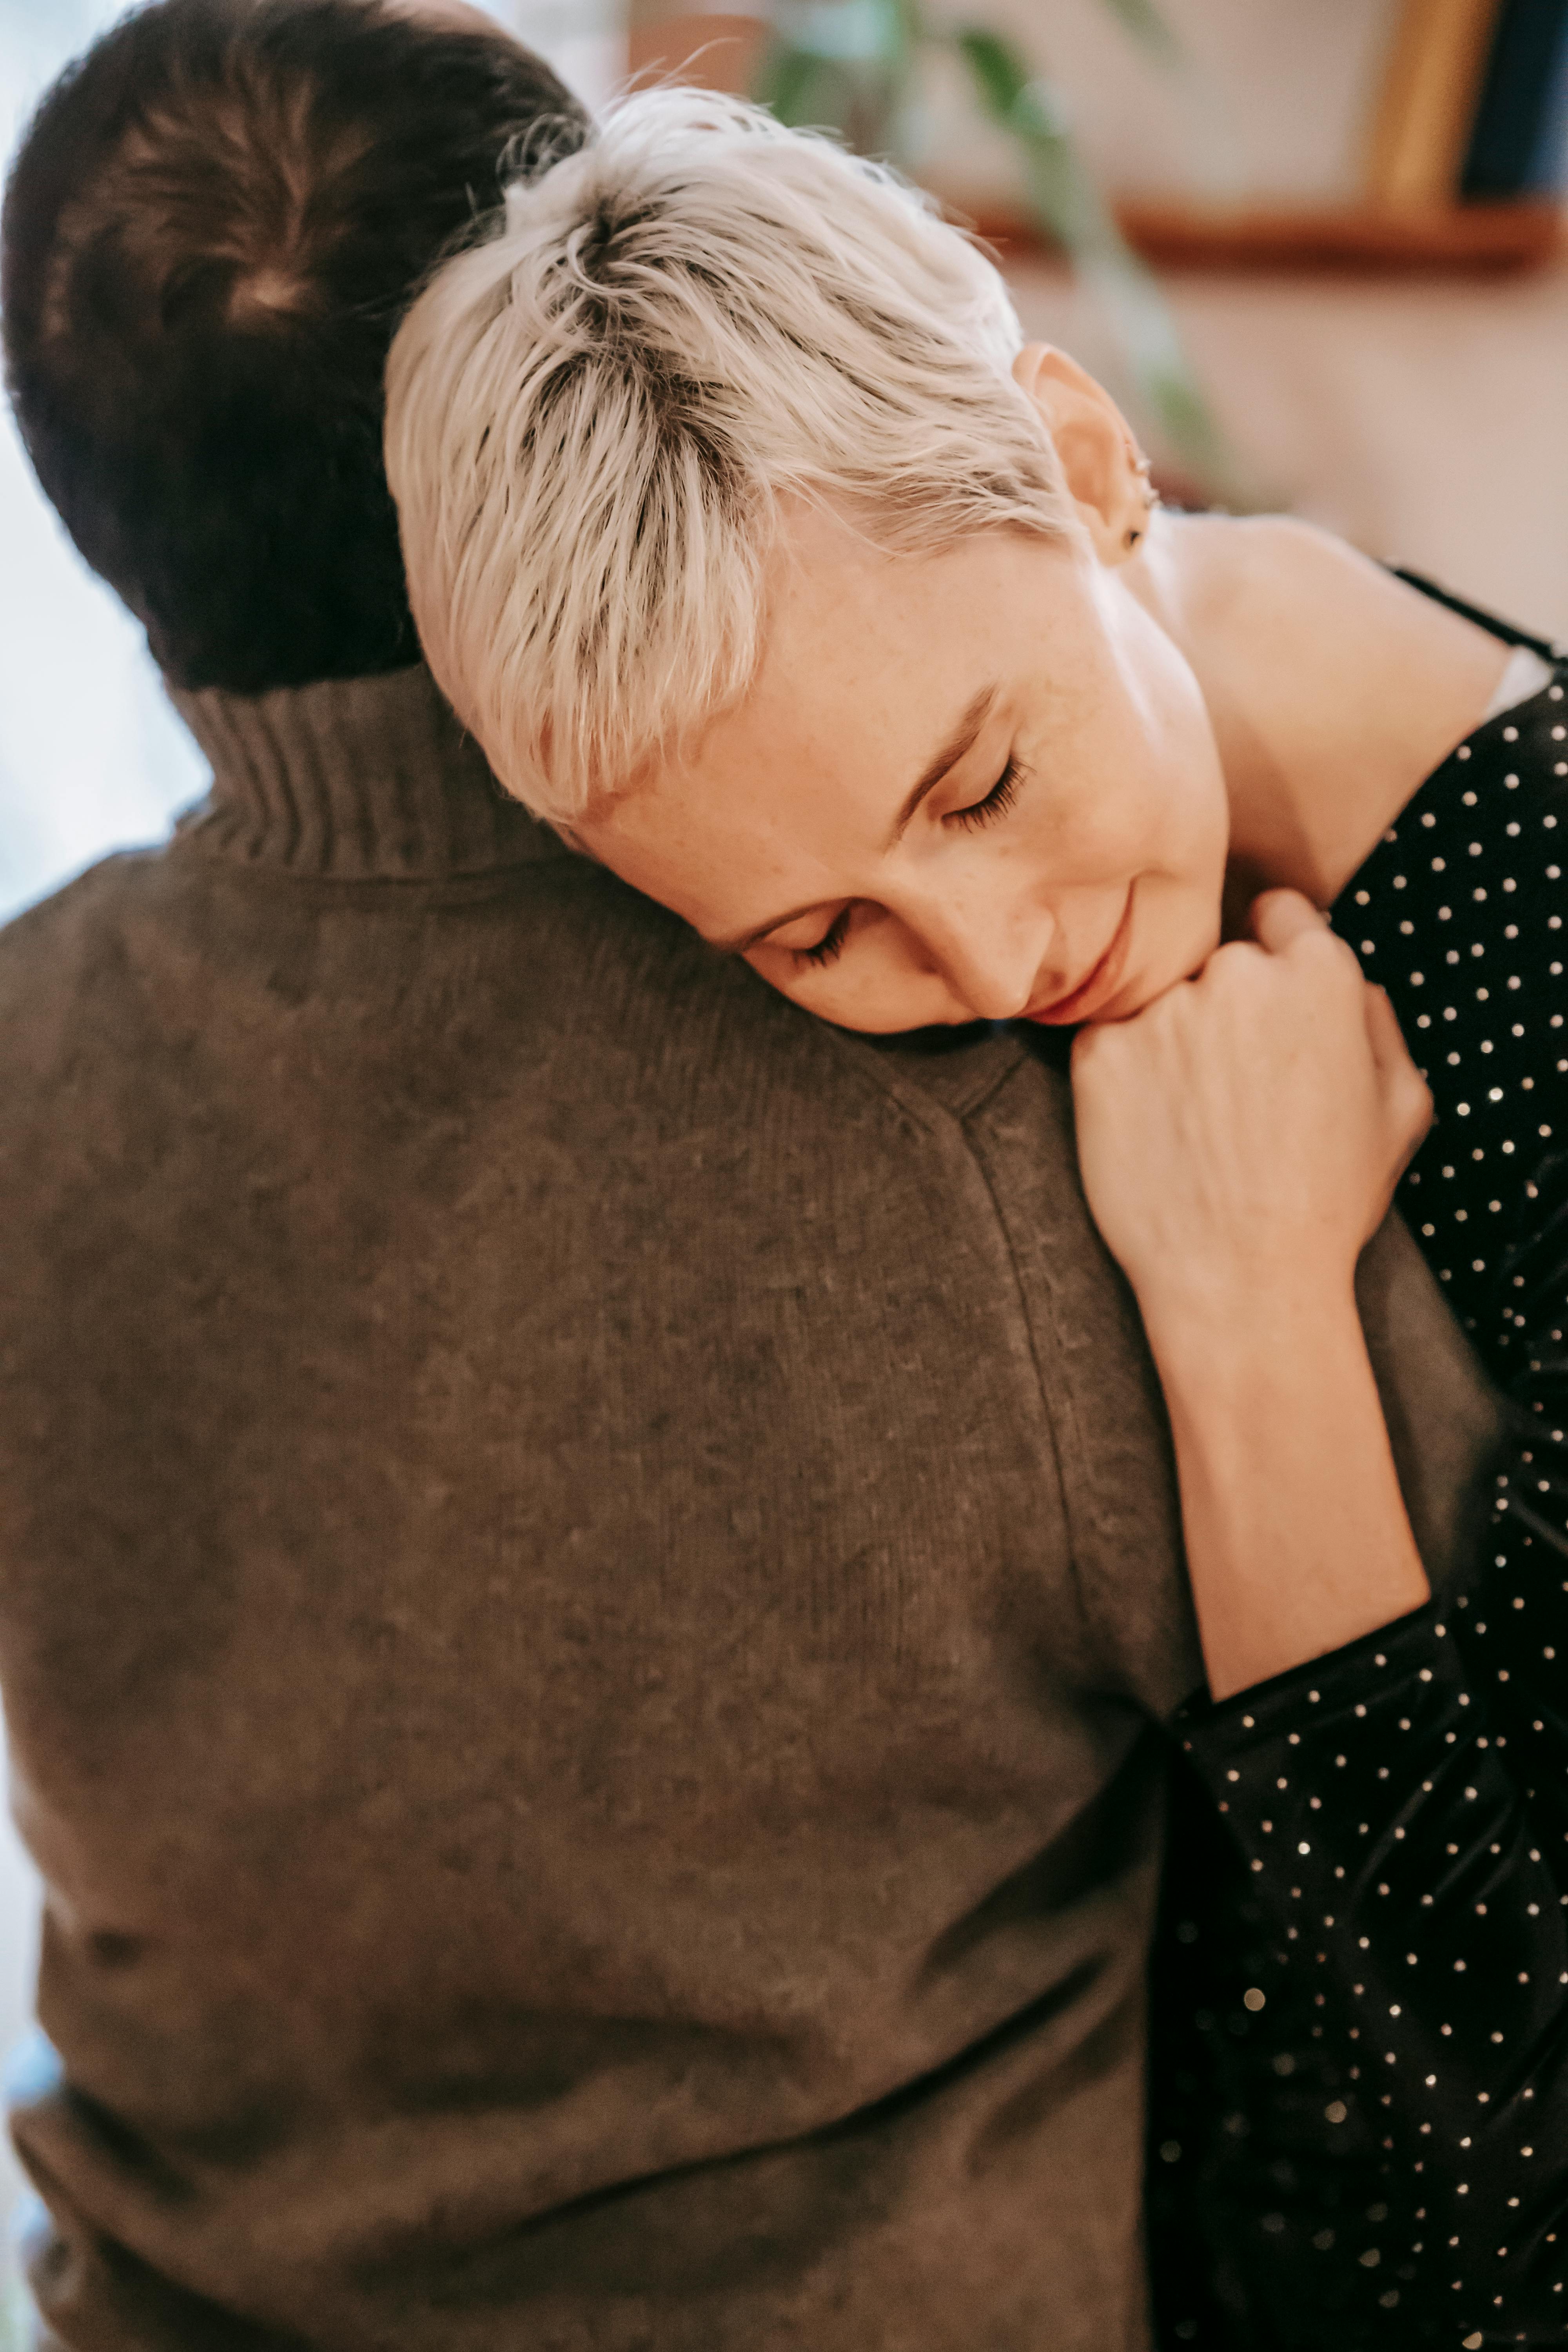 A man and woman hugging | Source: Pexels